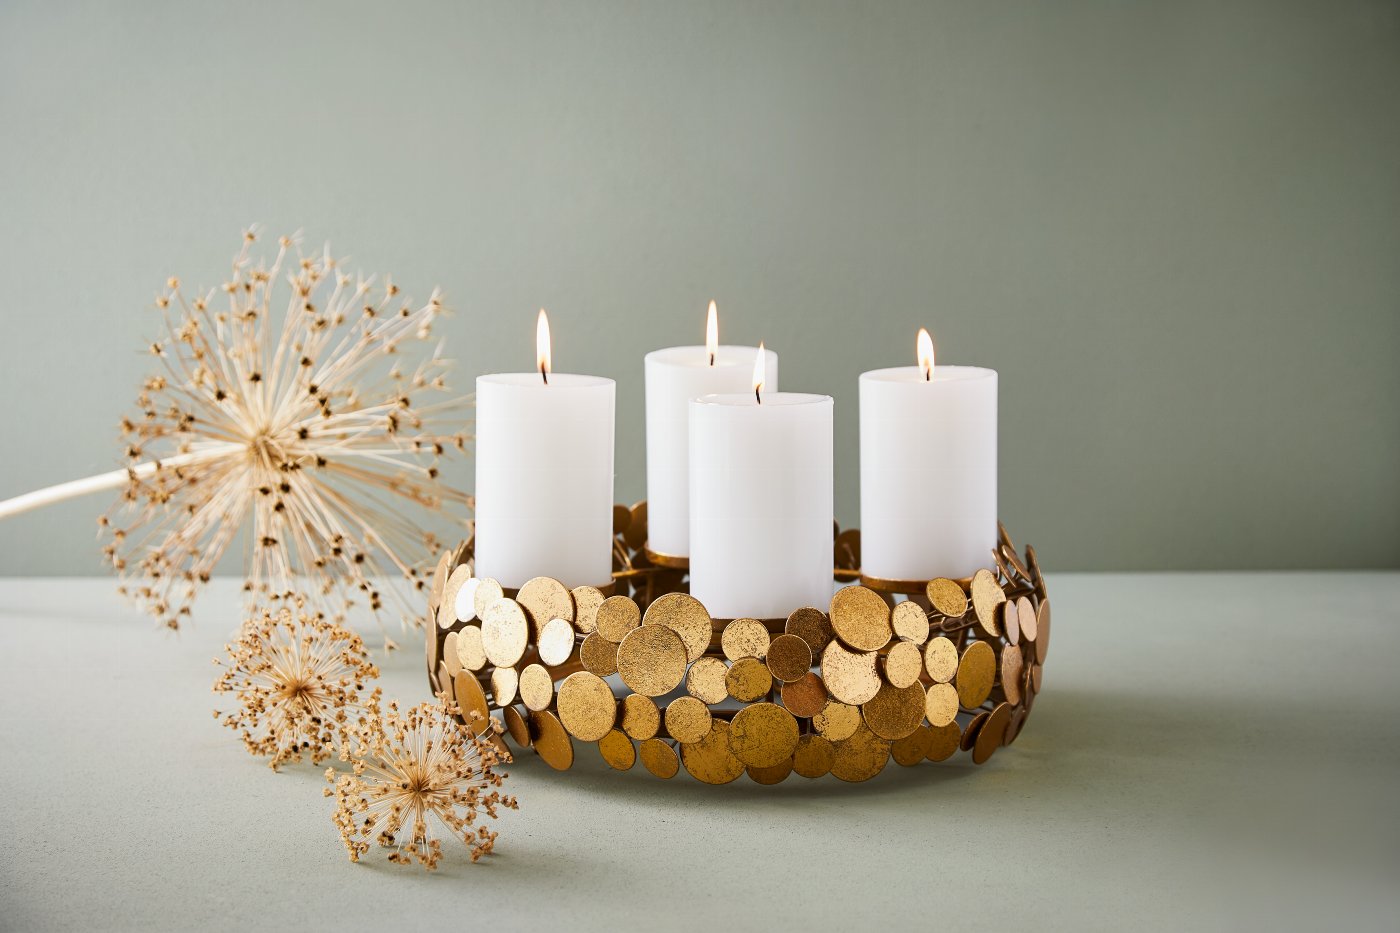 Jimin table top wreath with 4 candleholders